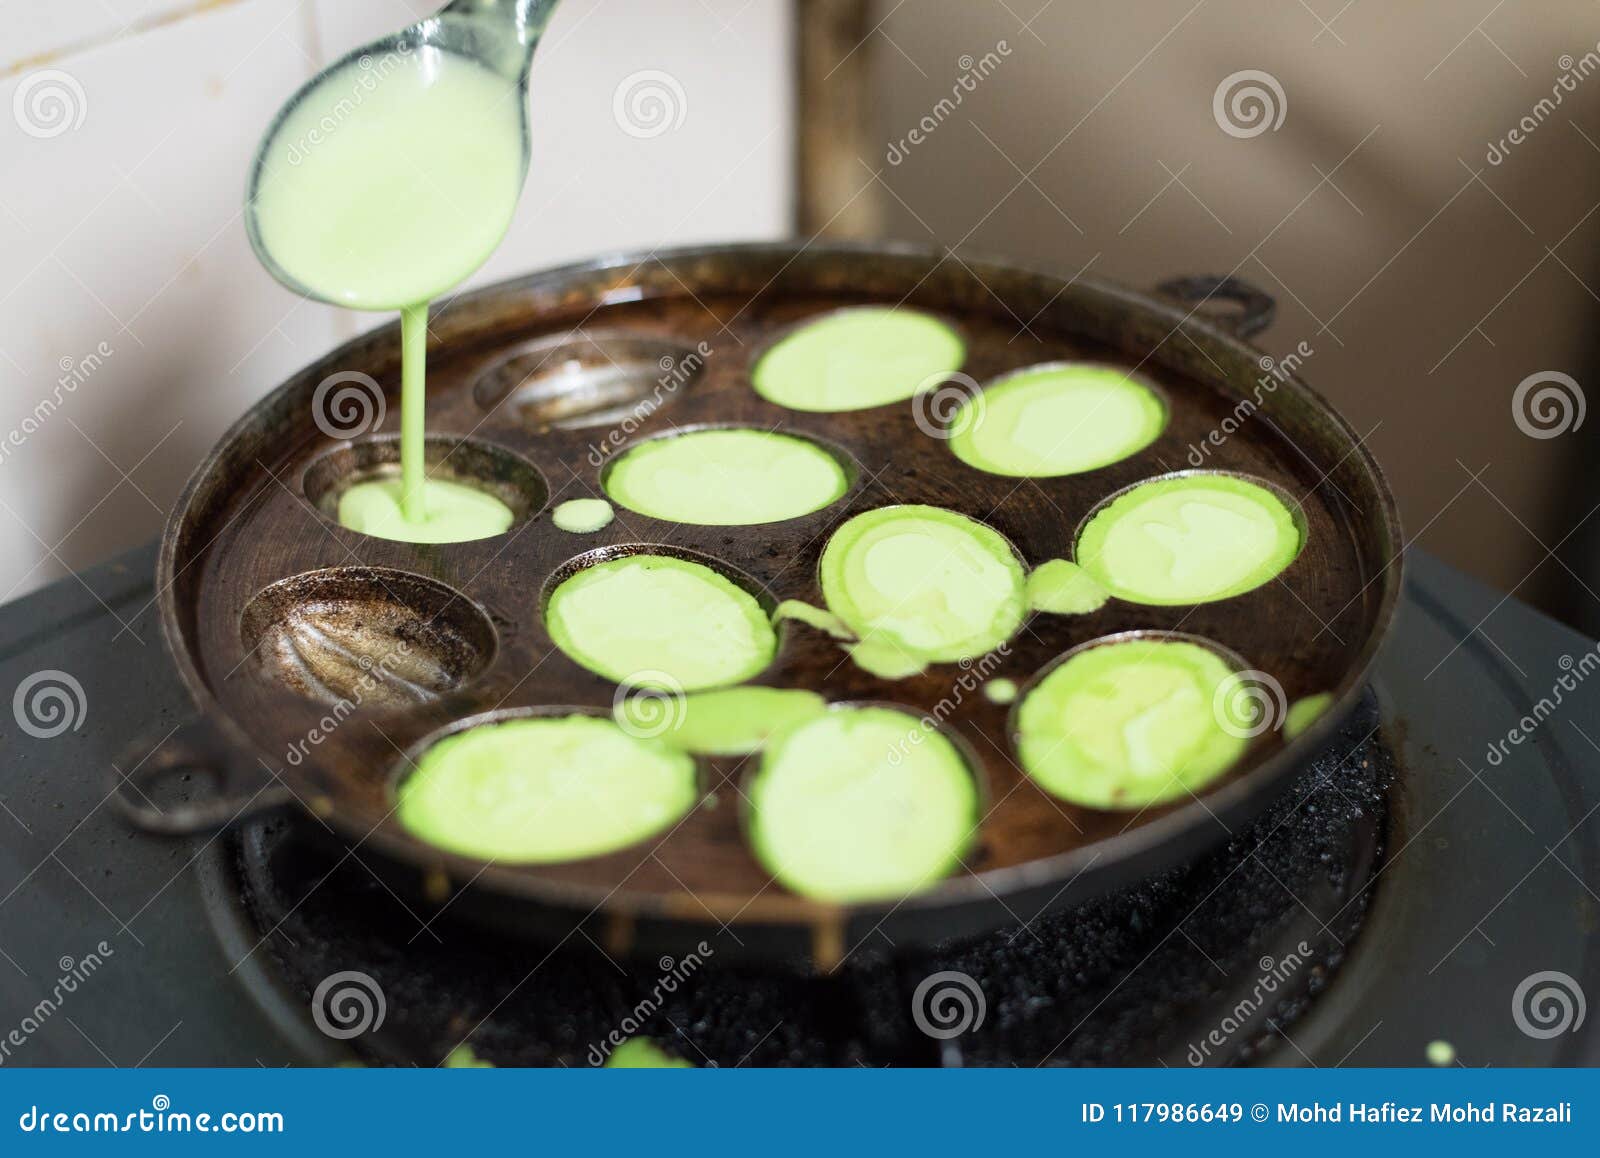 preparing or cooking kuih cara manis, a malay traditional cuisine in malaysia